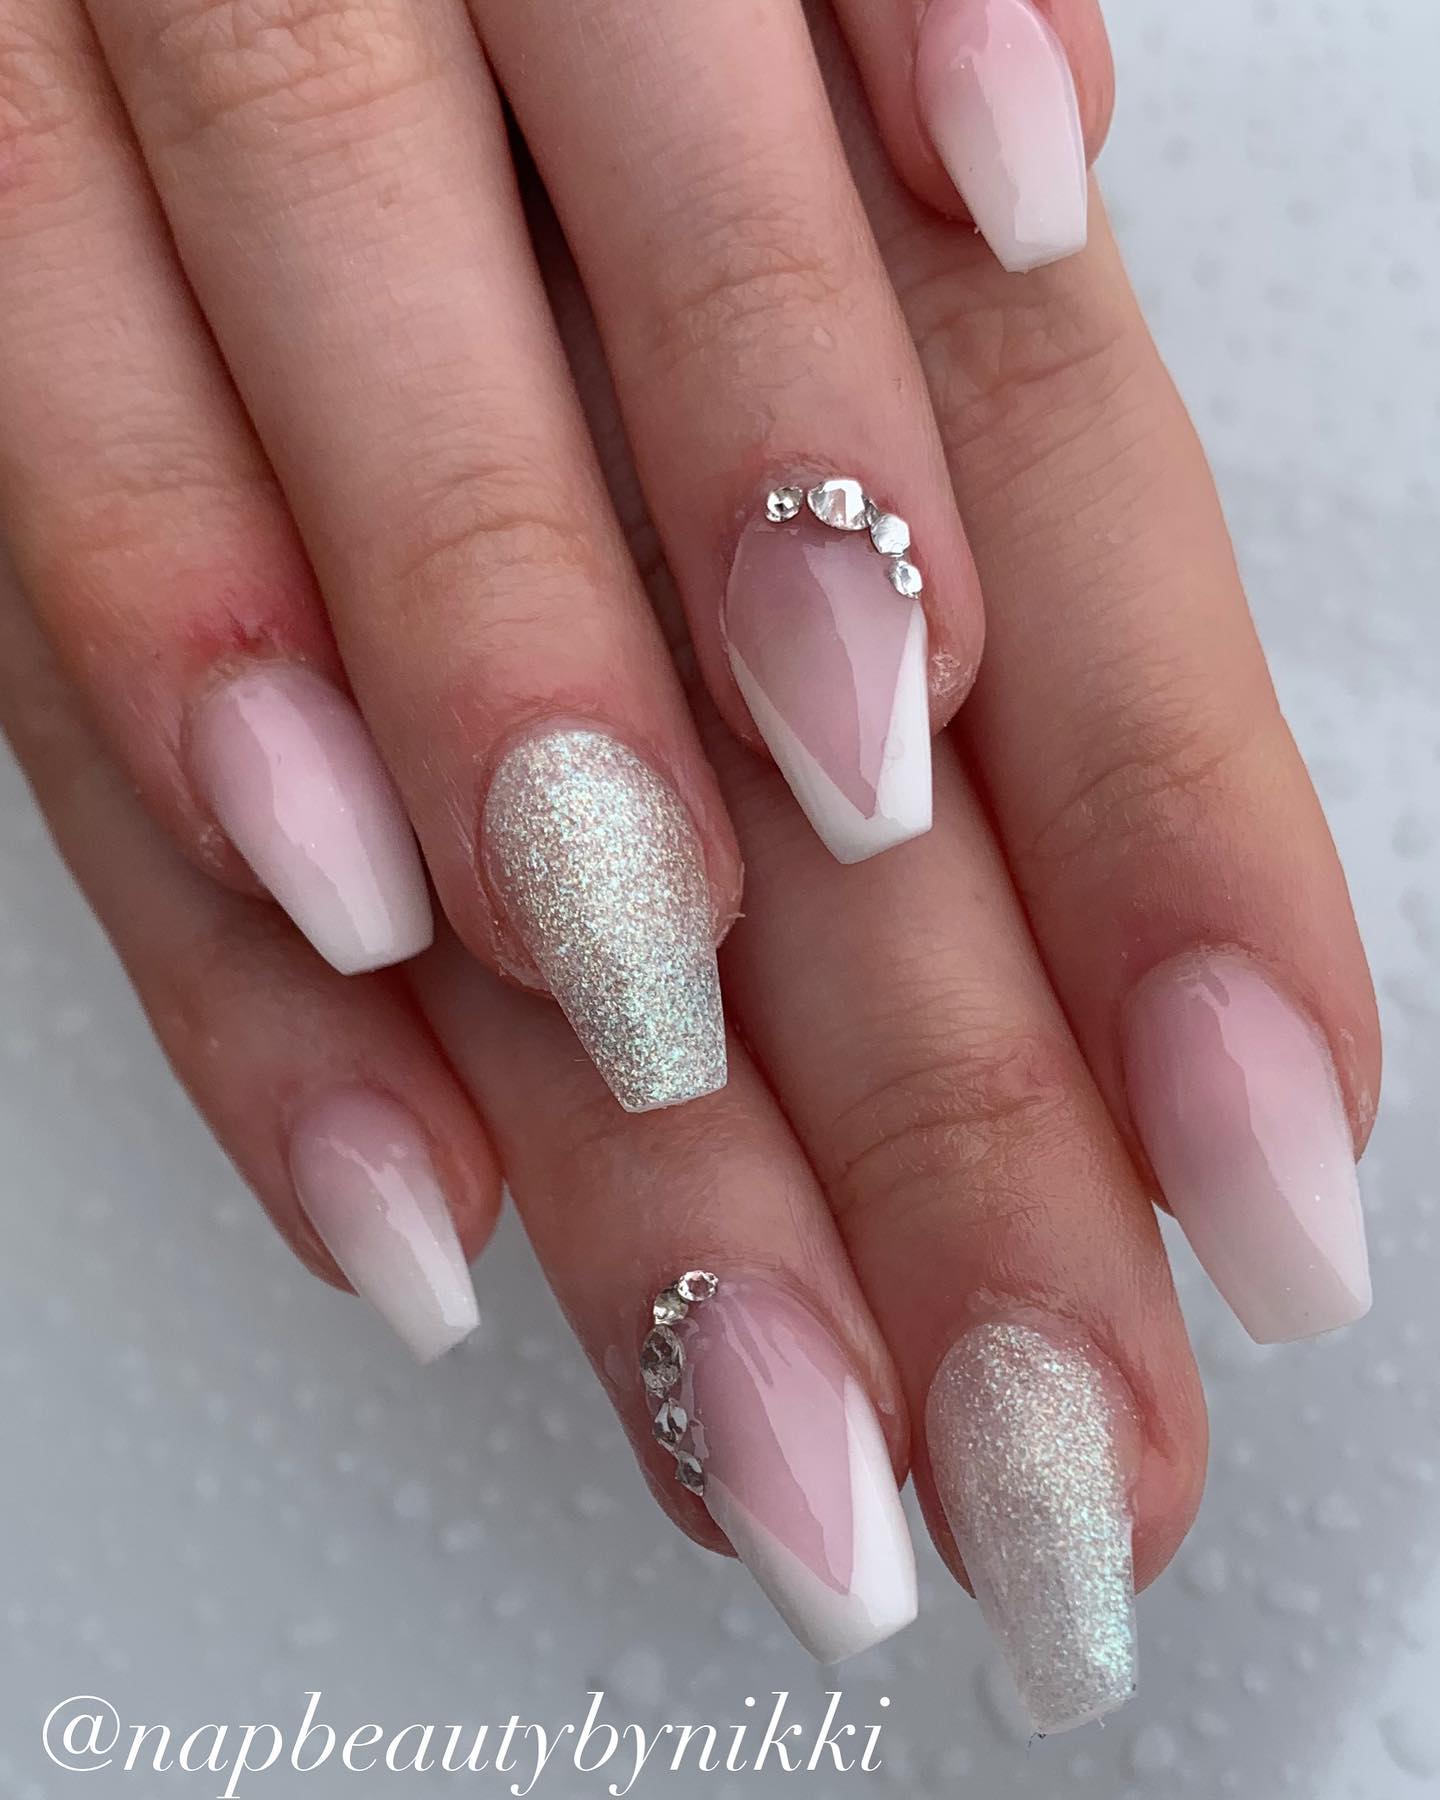  It is sometimes so hard to choose one design that looks good on you. To overcome this problem, why don't you apply more than one design to your nails? If you're up for this, use glitters, a French manicure and some stones for your ombre nails.